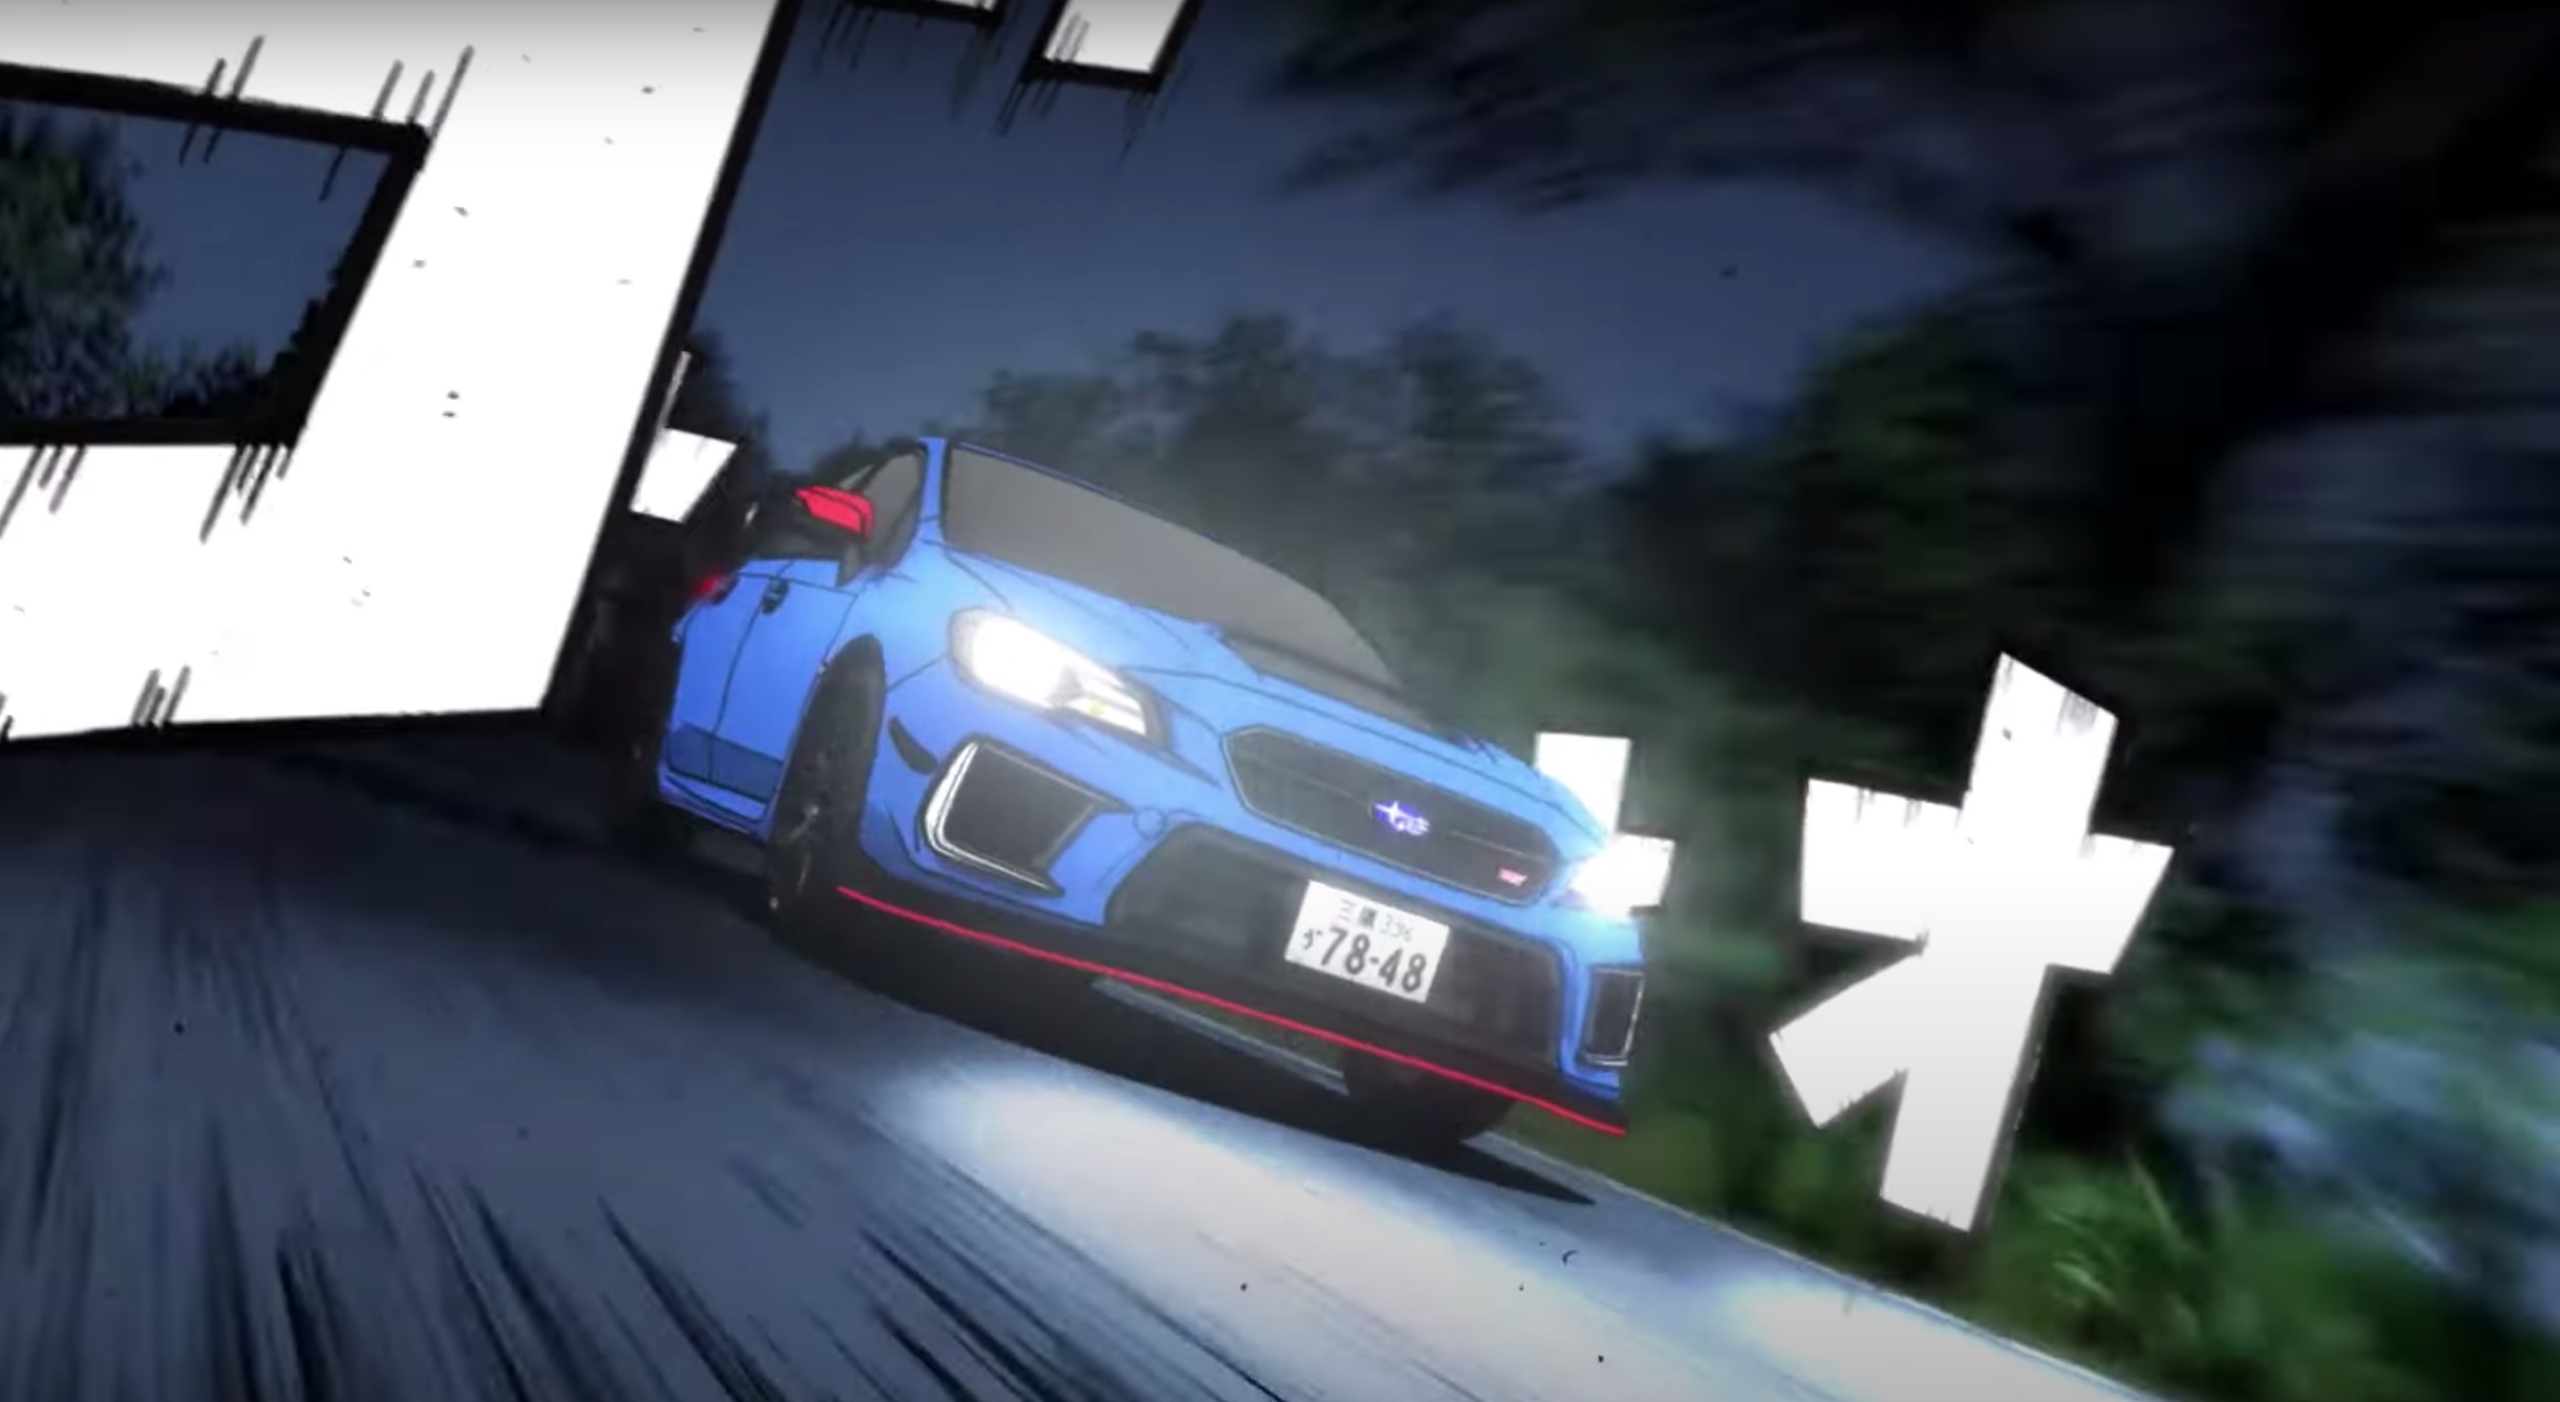 Subaru sends off the WRX STI with Initial D anime-style ad